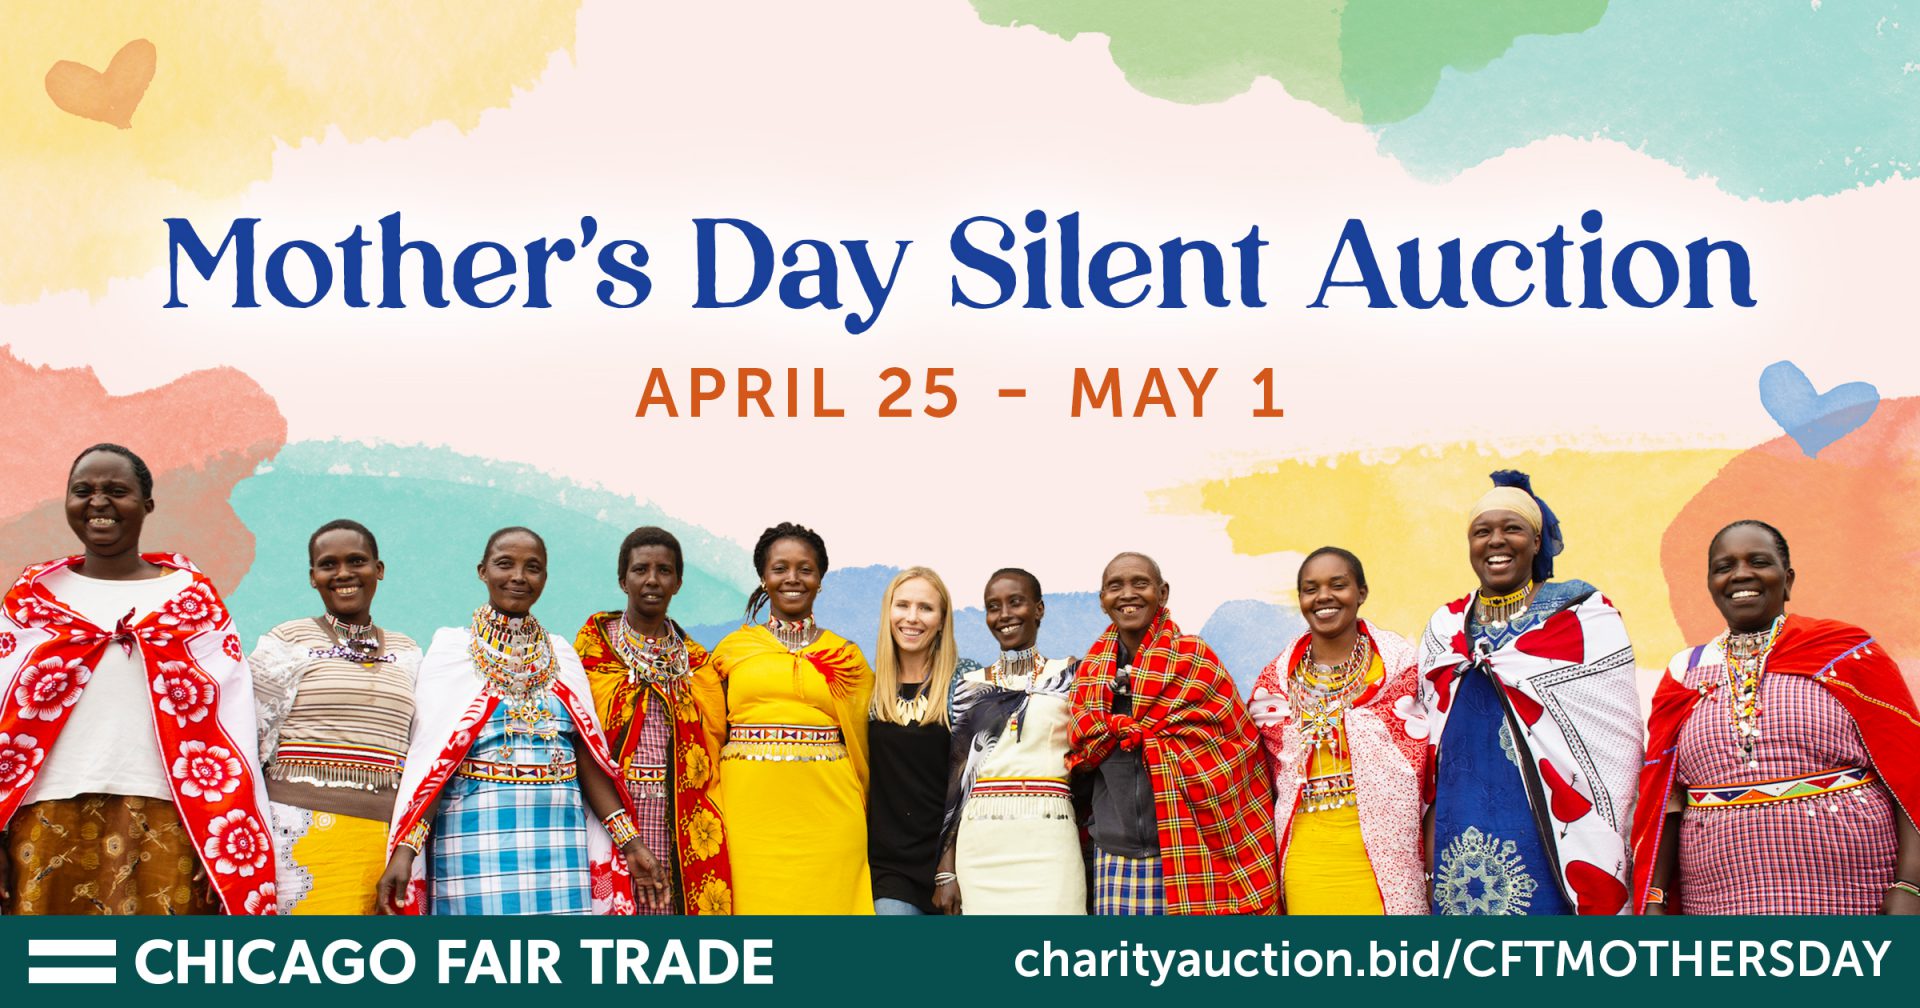 Mother's Day Silent Auction